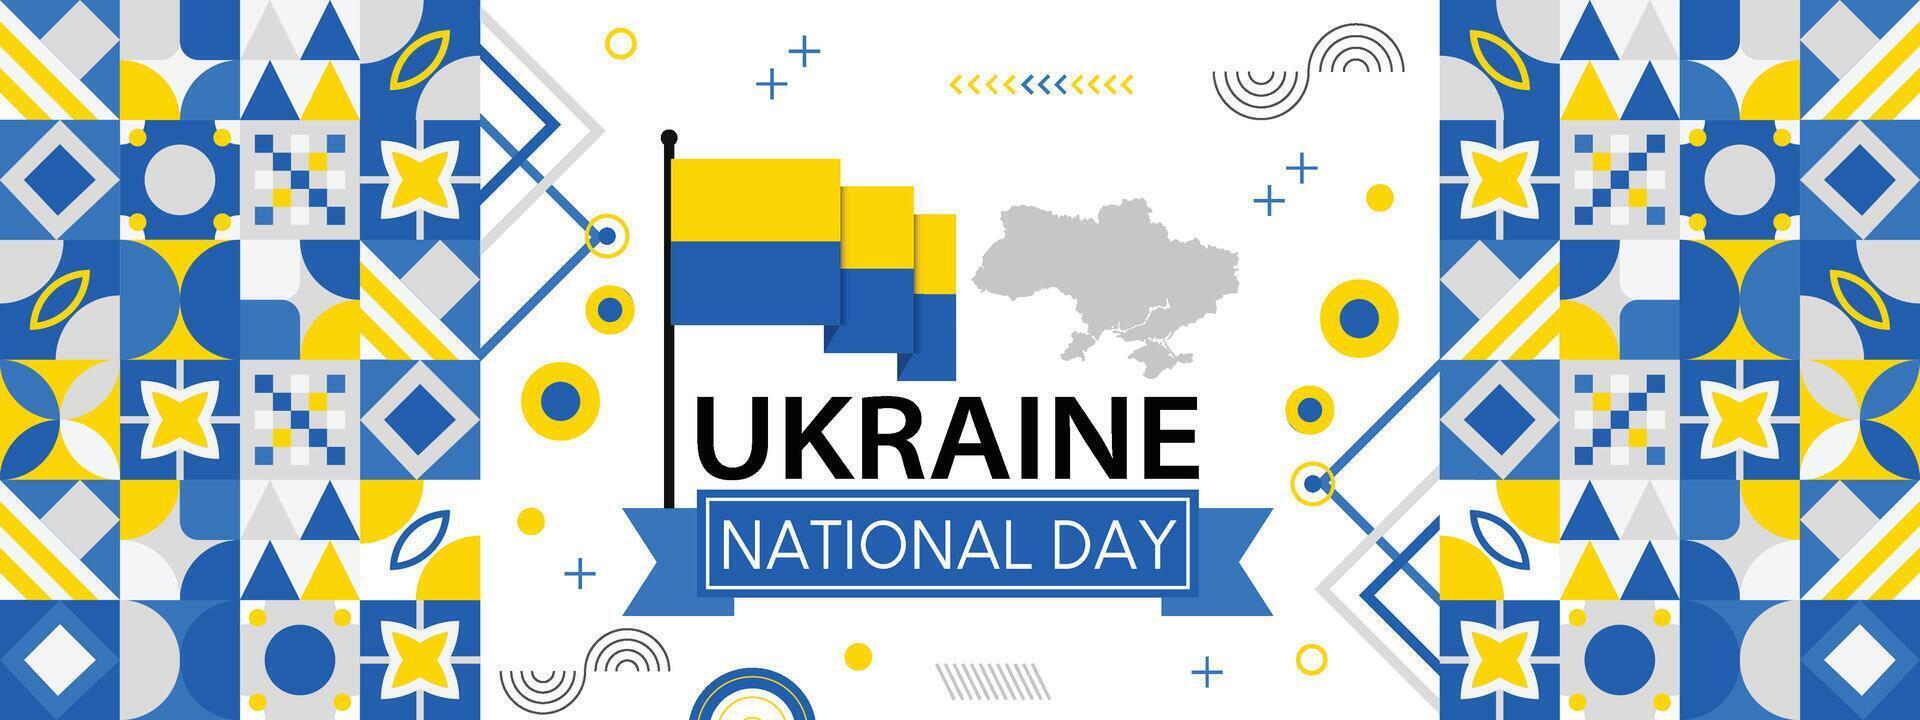 Ukraine banner for national day with cultural design. Ukrainian flag and map with typography and blue yellow color theme. vector